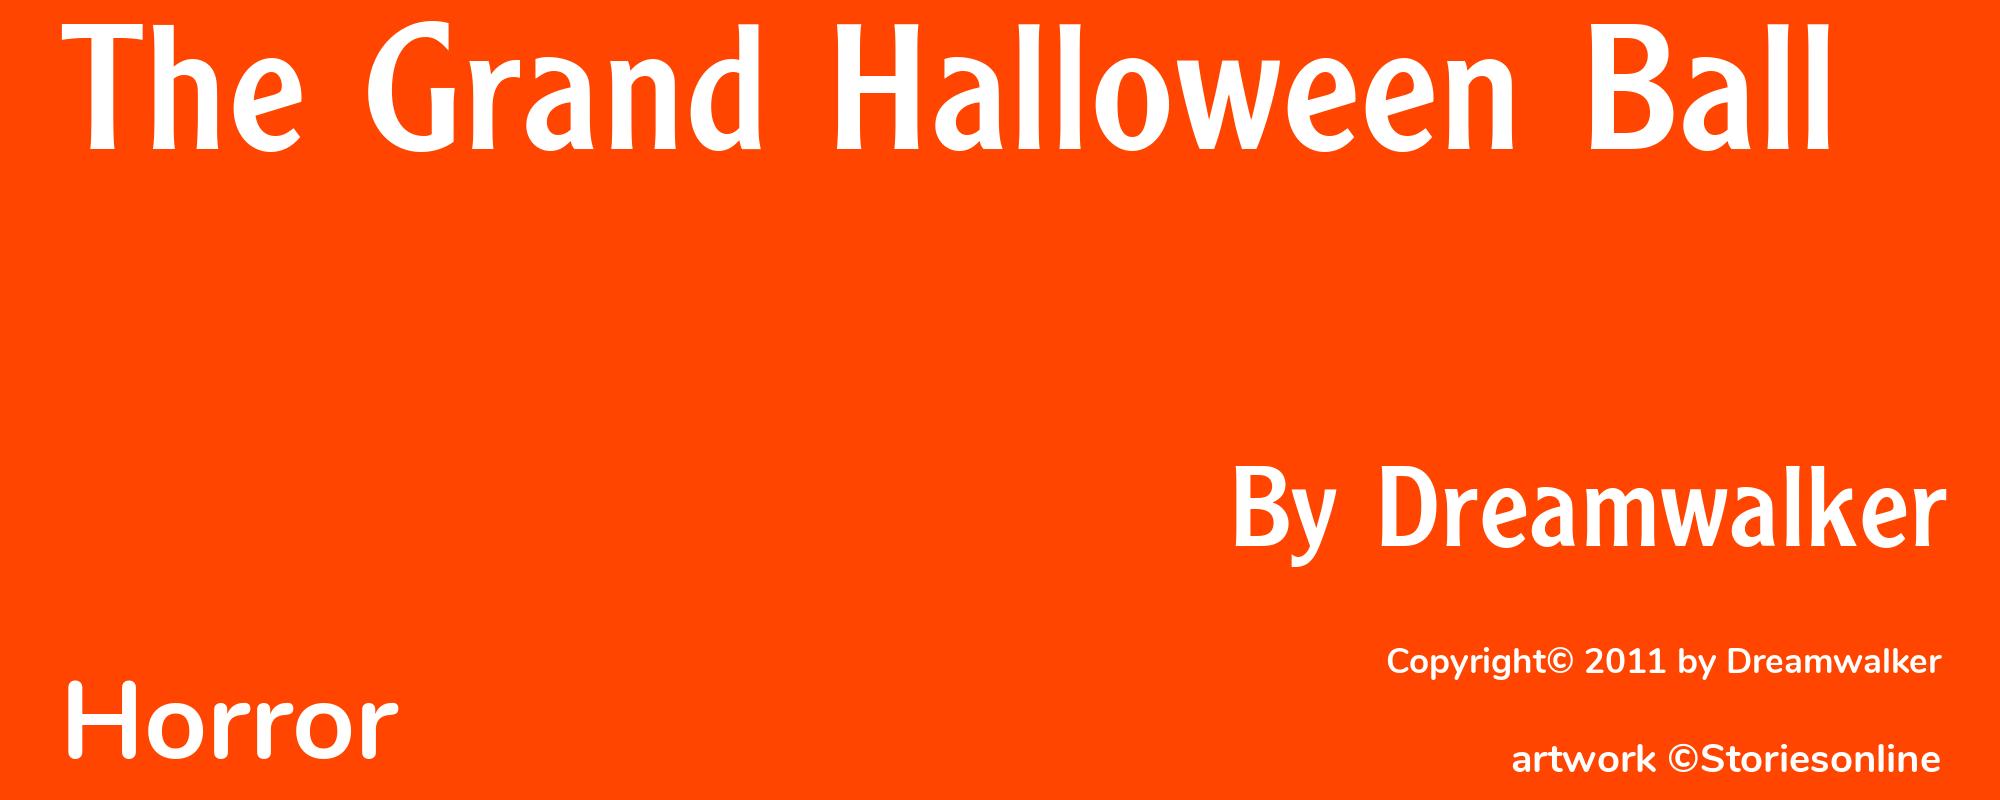 The Grand Halloween Ball - Cover